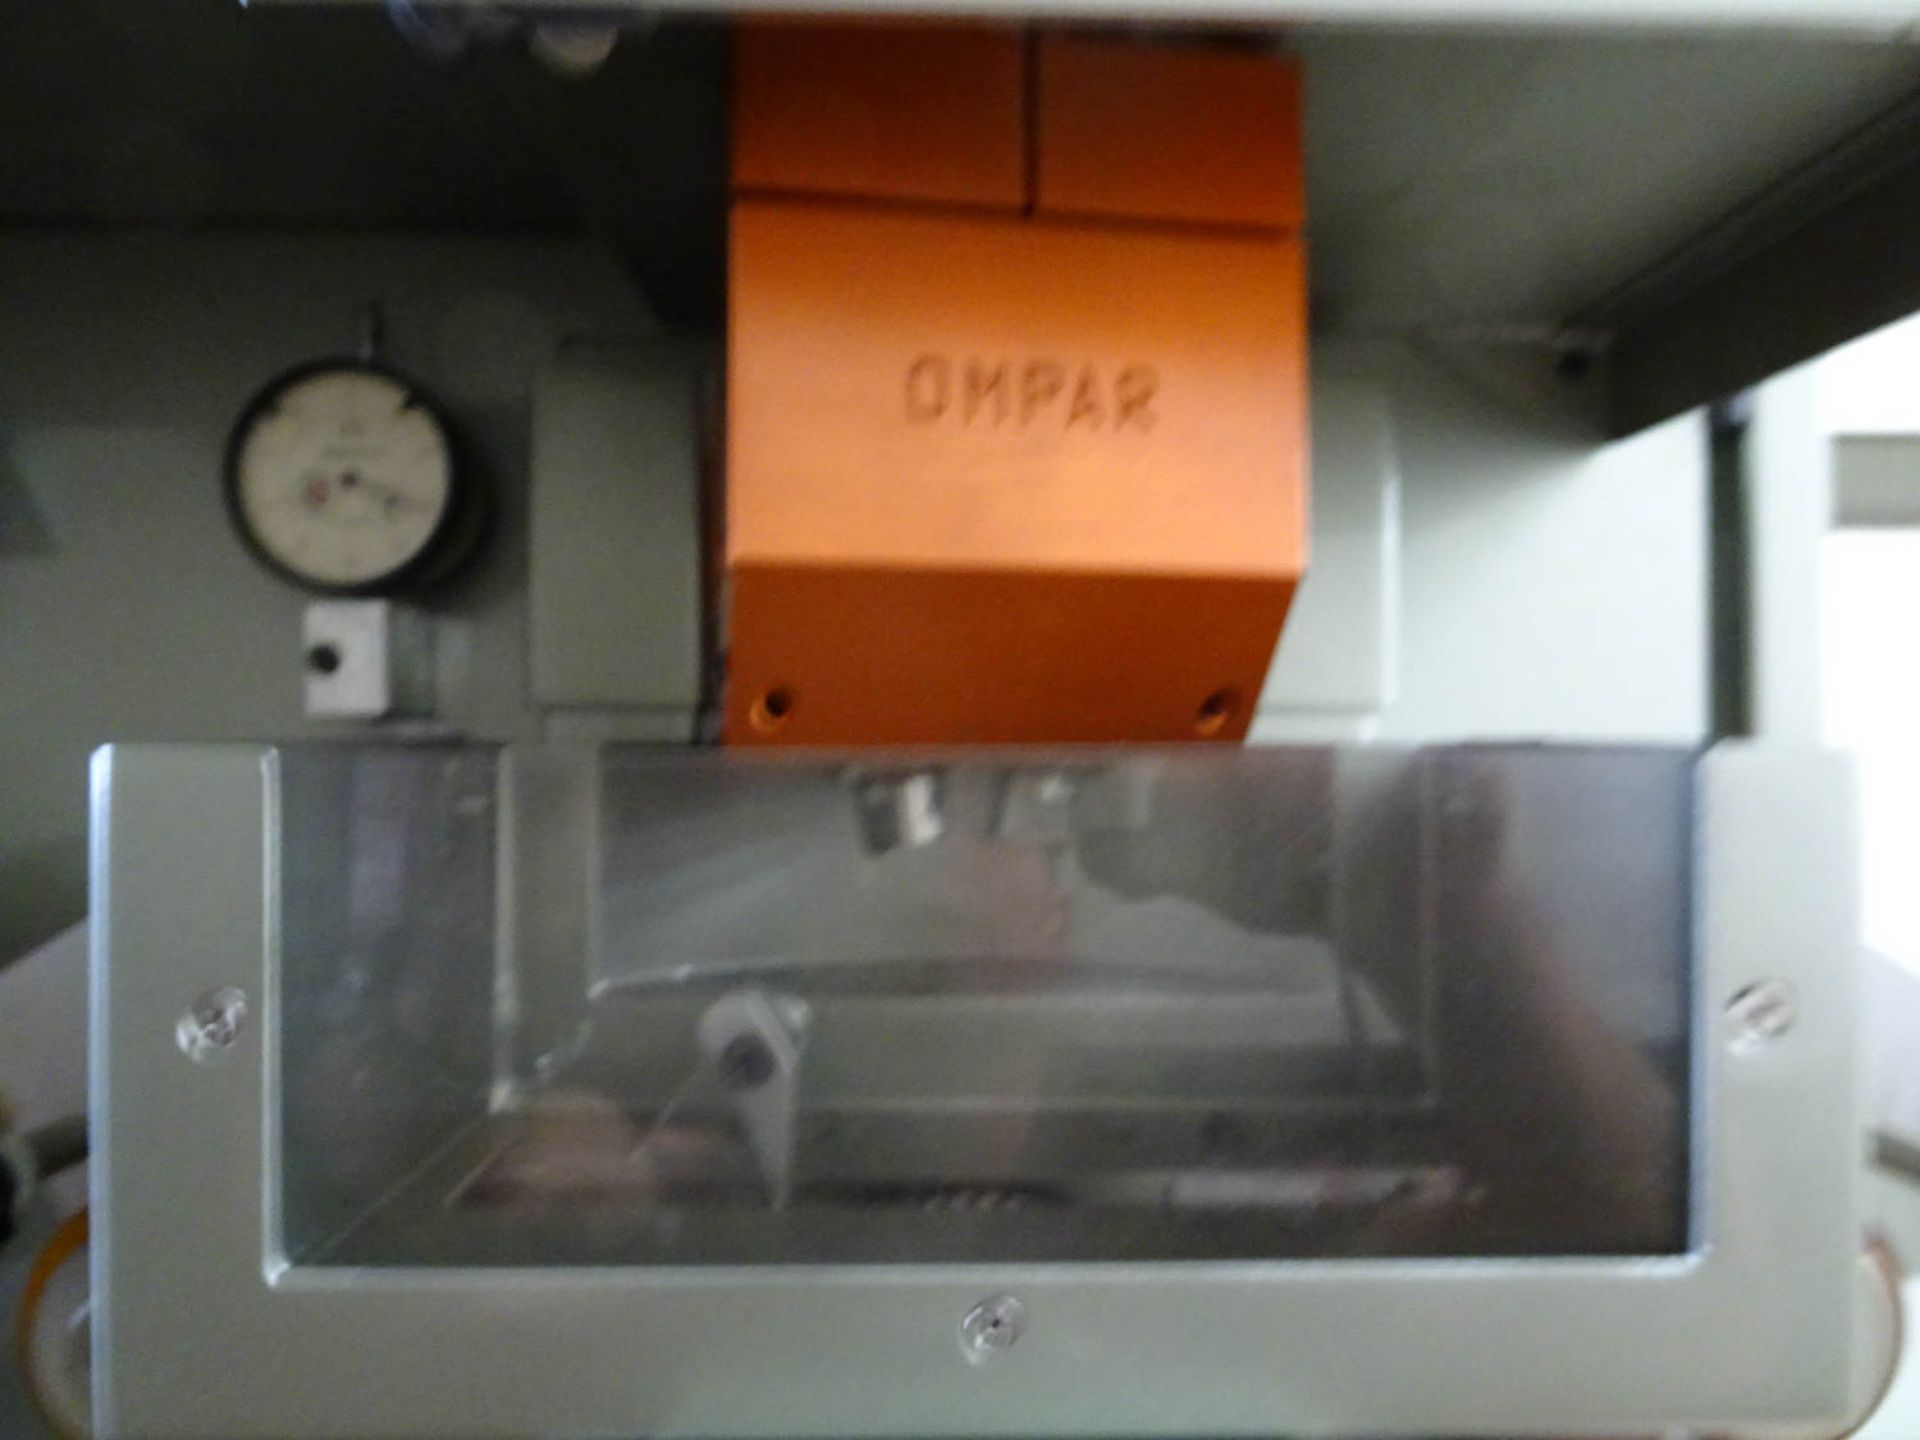 OMPAR MDL. RA (ITALY) (CE) FANTASY ELECTRONIC DIAMOND FACETING / CUTTING MACHINE, DOUBLE HEAD, 230 - Image 9 of 16